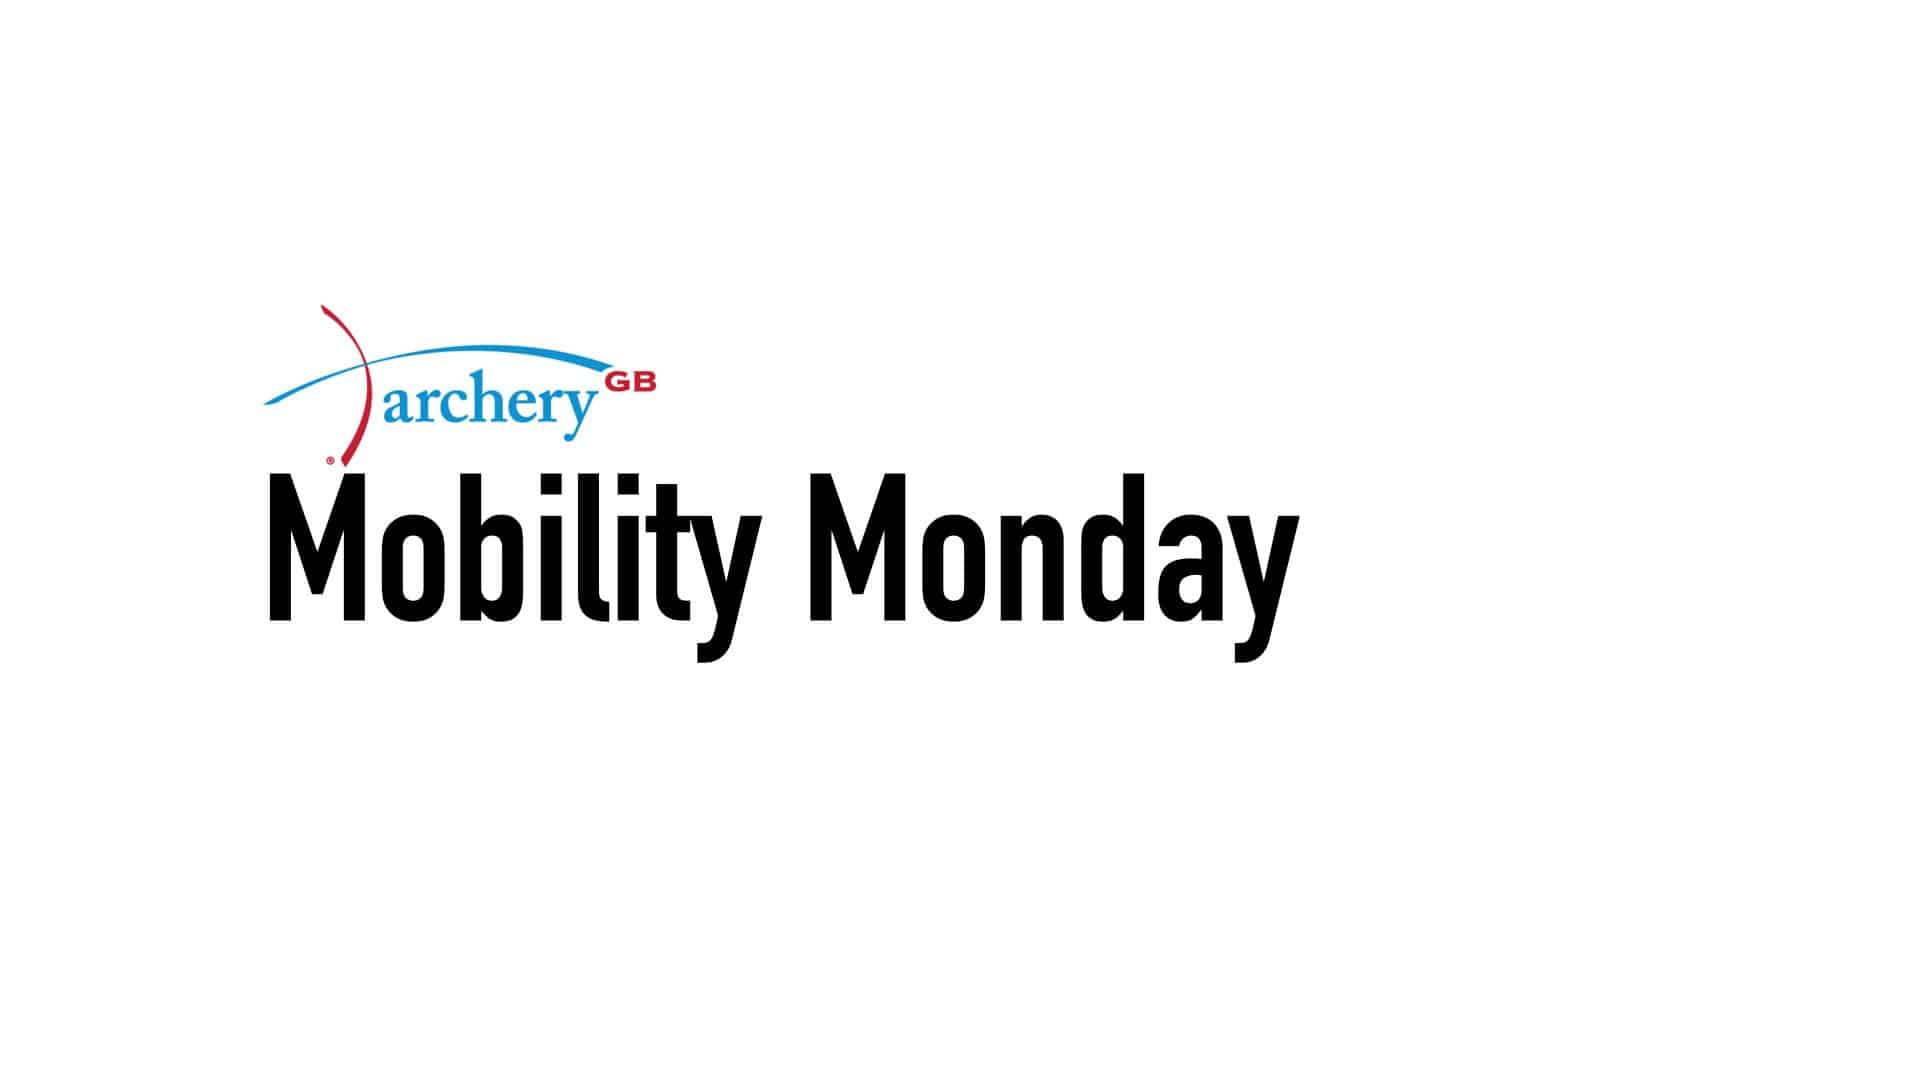 Why is Mobility Monday important for archery?